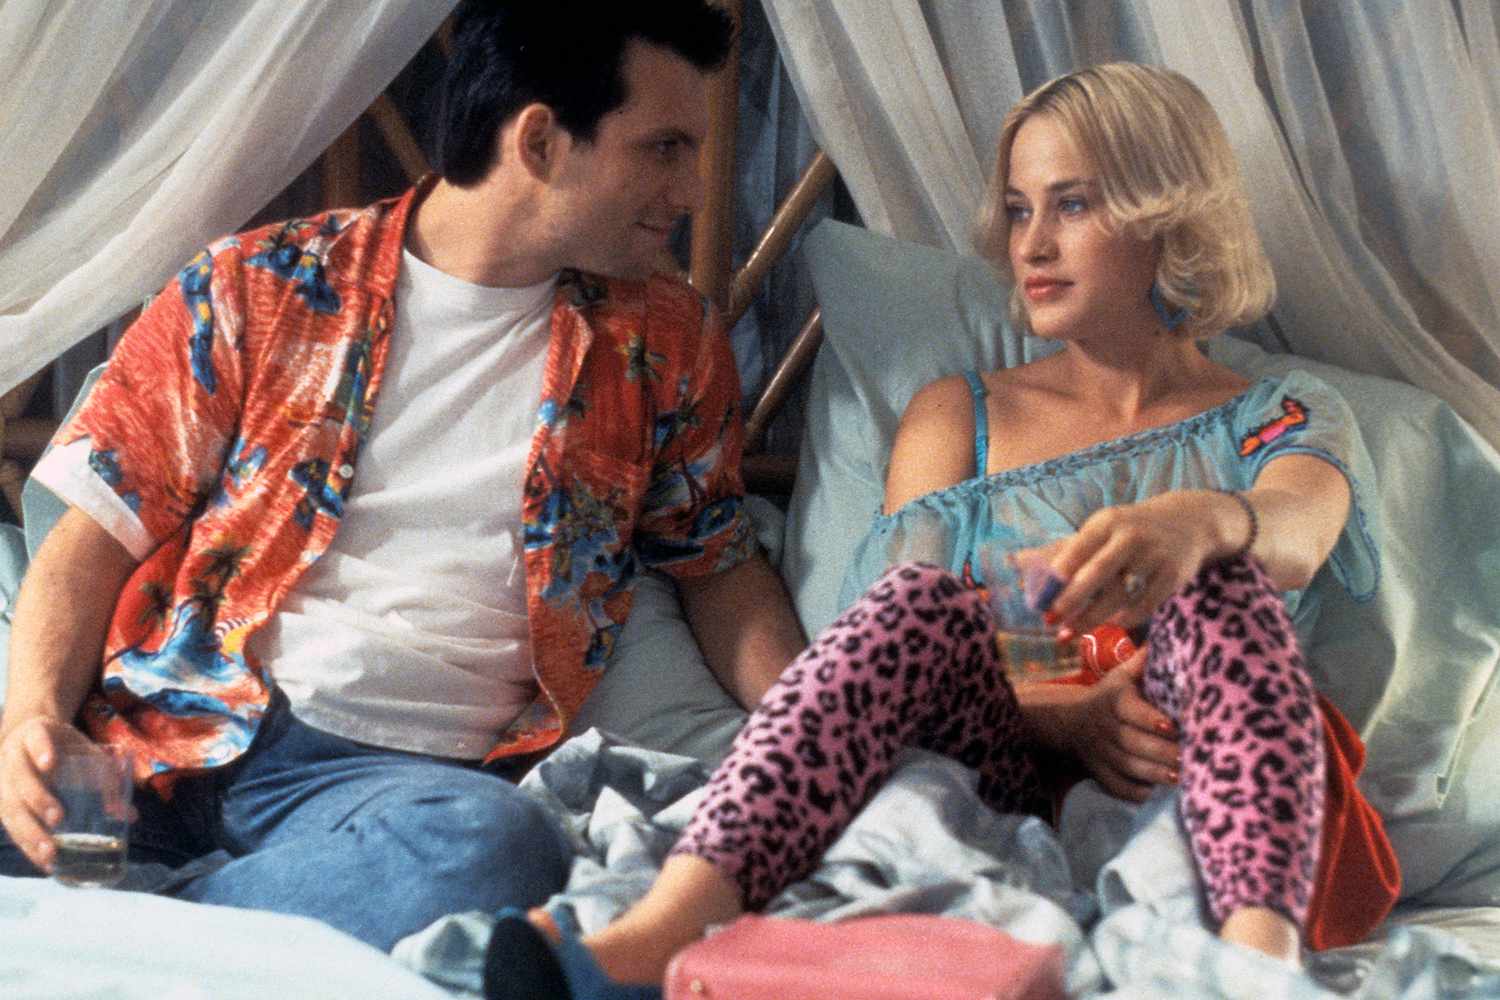 Christian Slater sits in bed with Patricia Arquette in a scene from the film 'True Romance', 1993. (Photo by Warner Brothers/Getty Images)